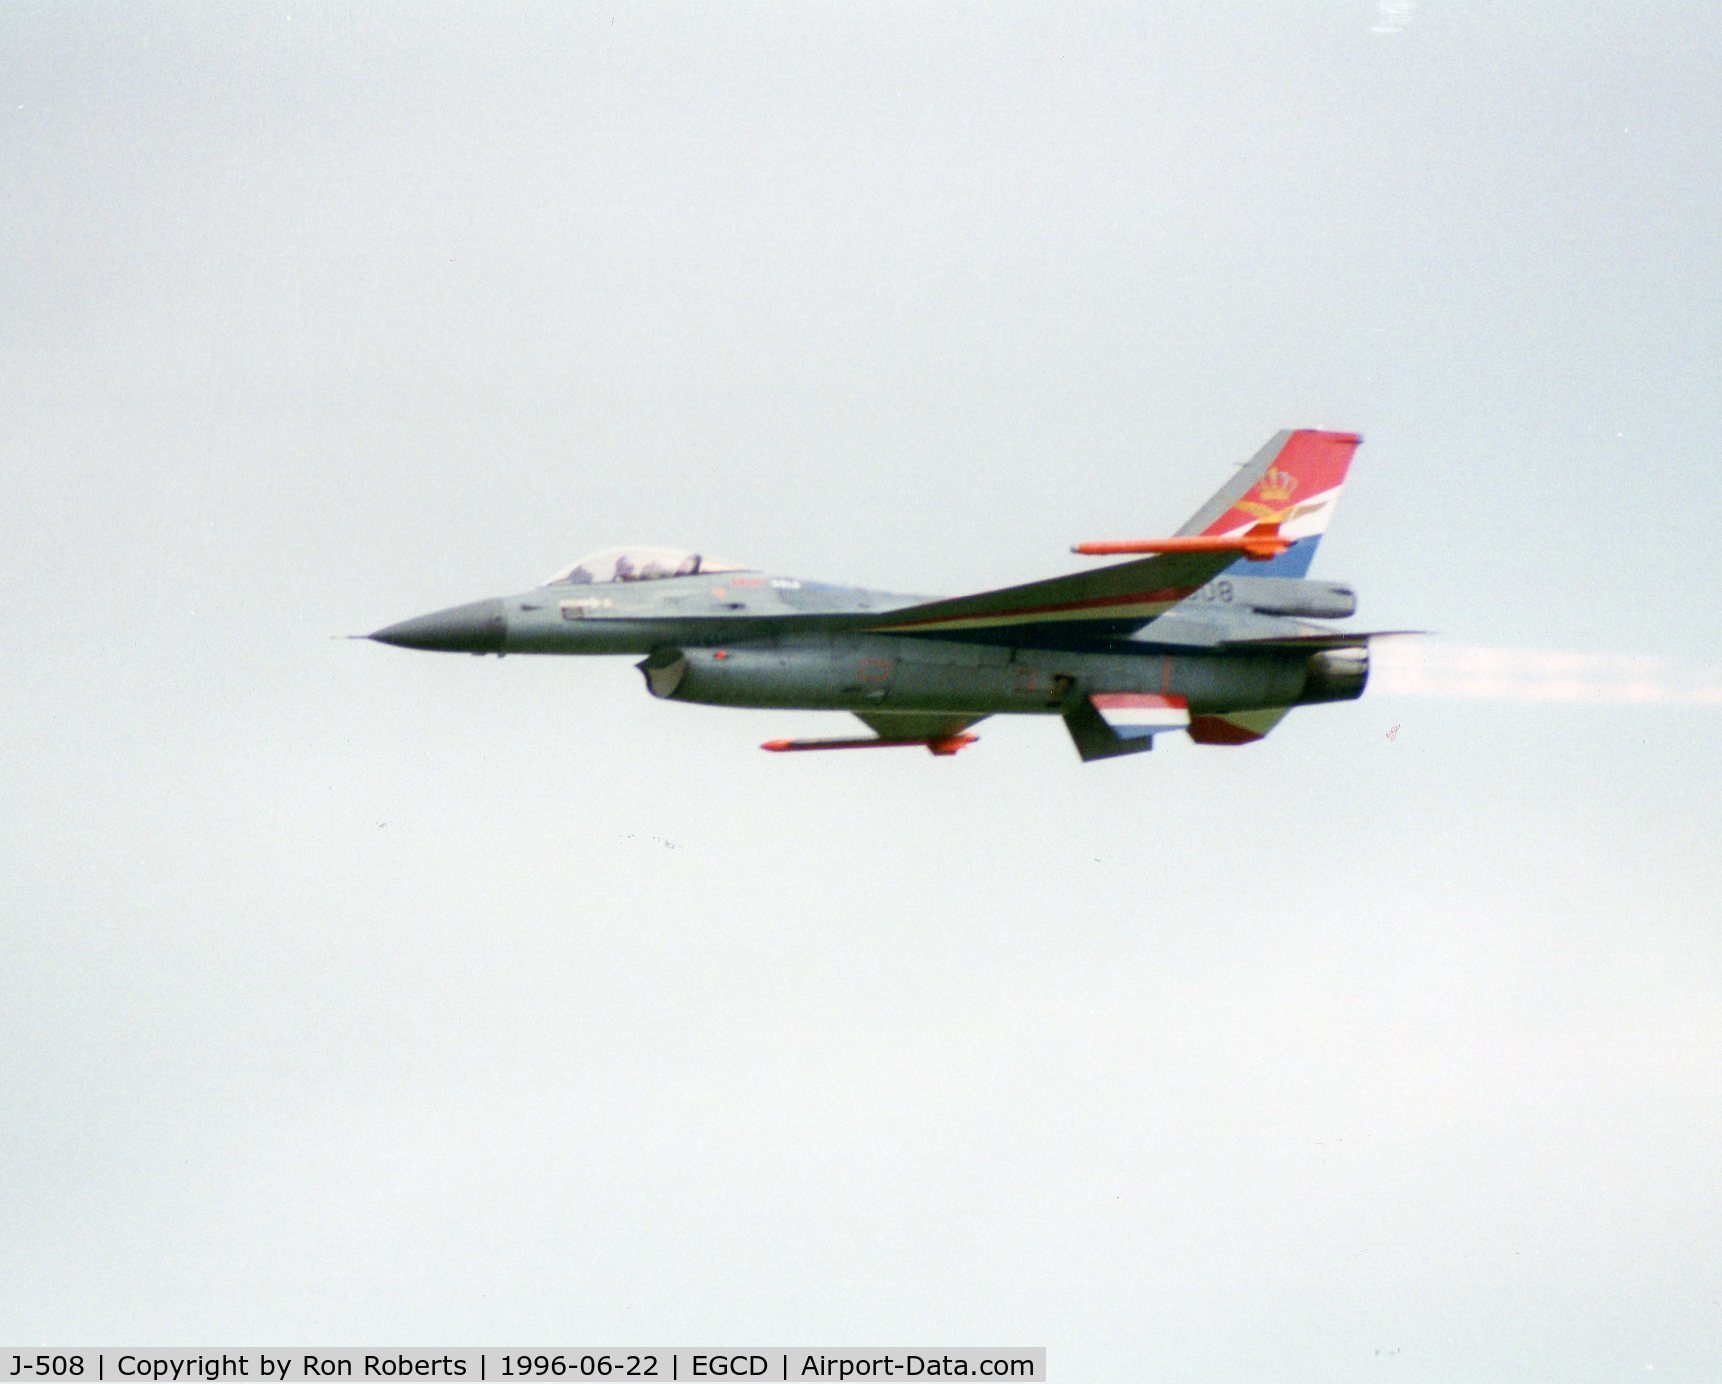 J-508, 1987 Fokker F-16A Fighting Falcon C/N 6D-147, The Royal Netherlands Air Force F16